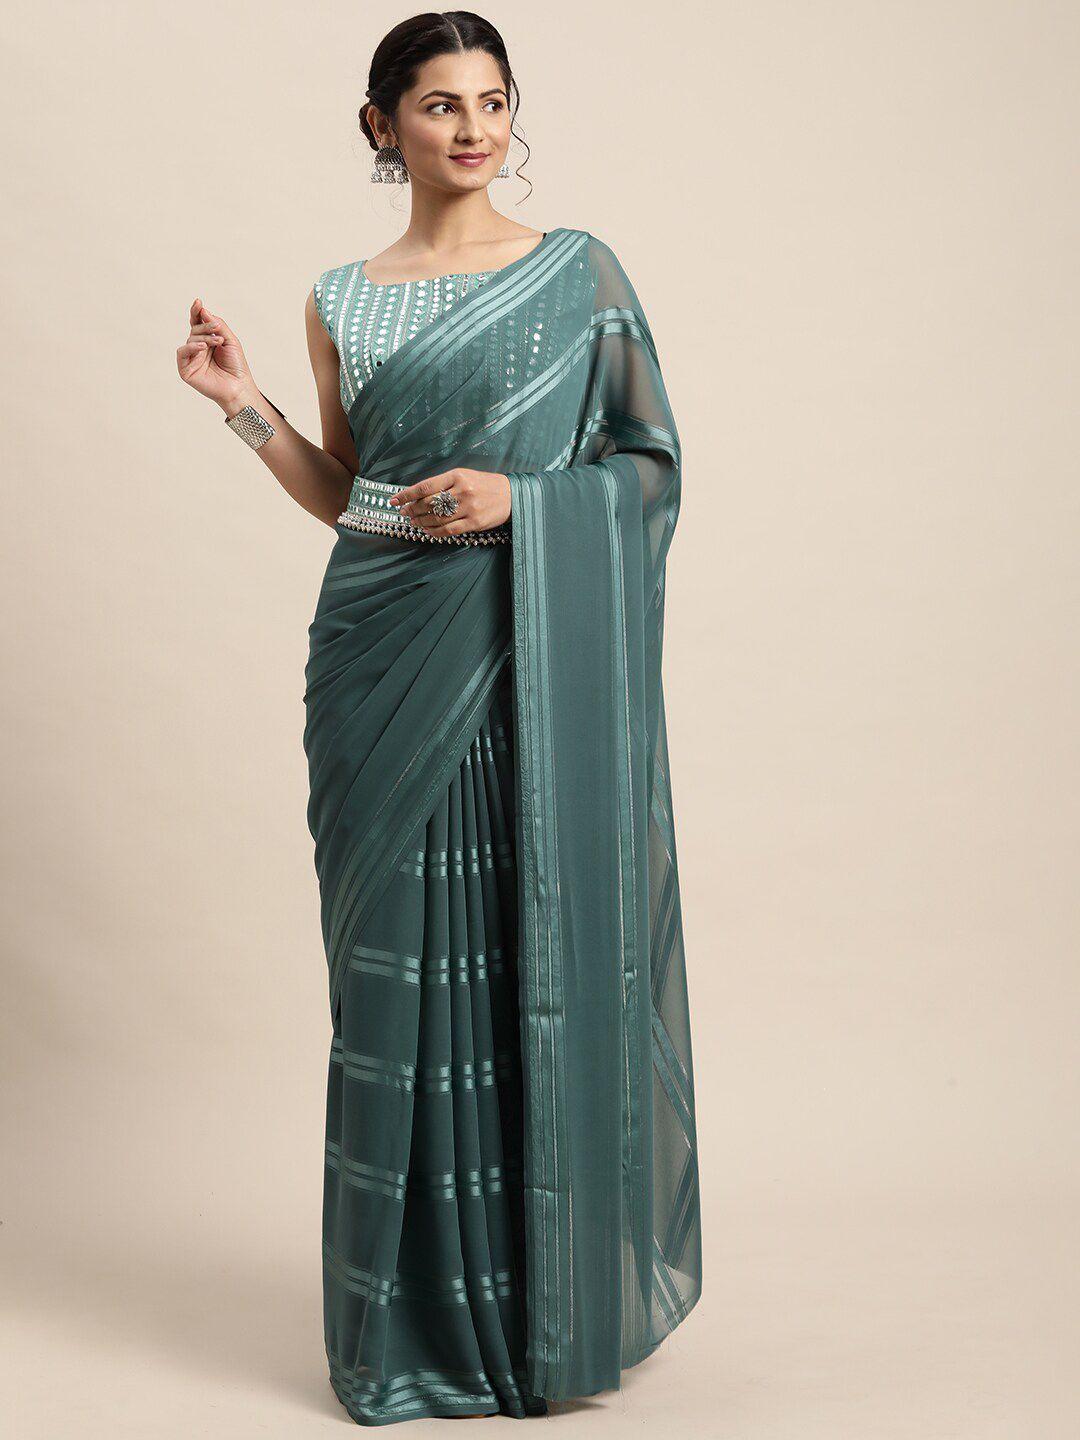 saree-mall-women-teal-poly-georgette-striped-saree-saree-with-matching-blouse